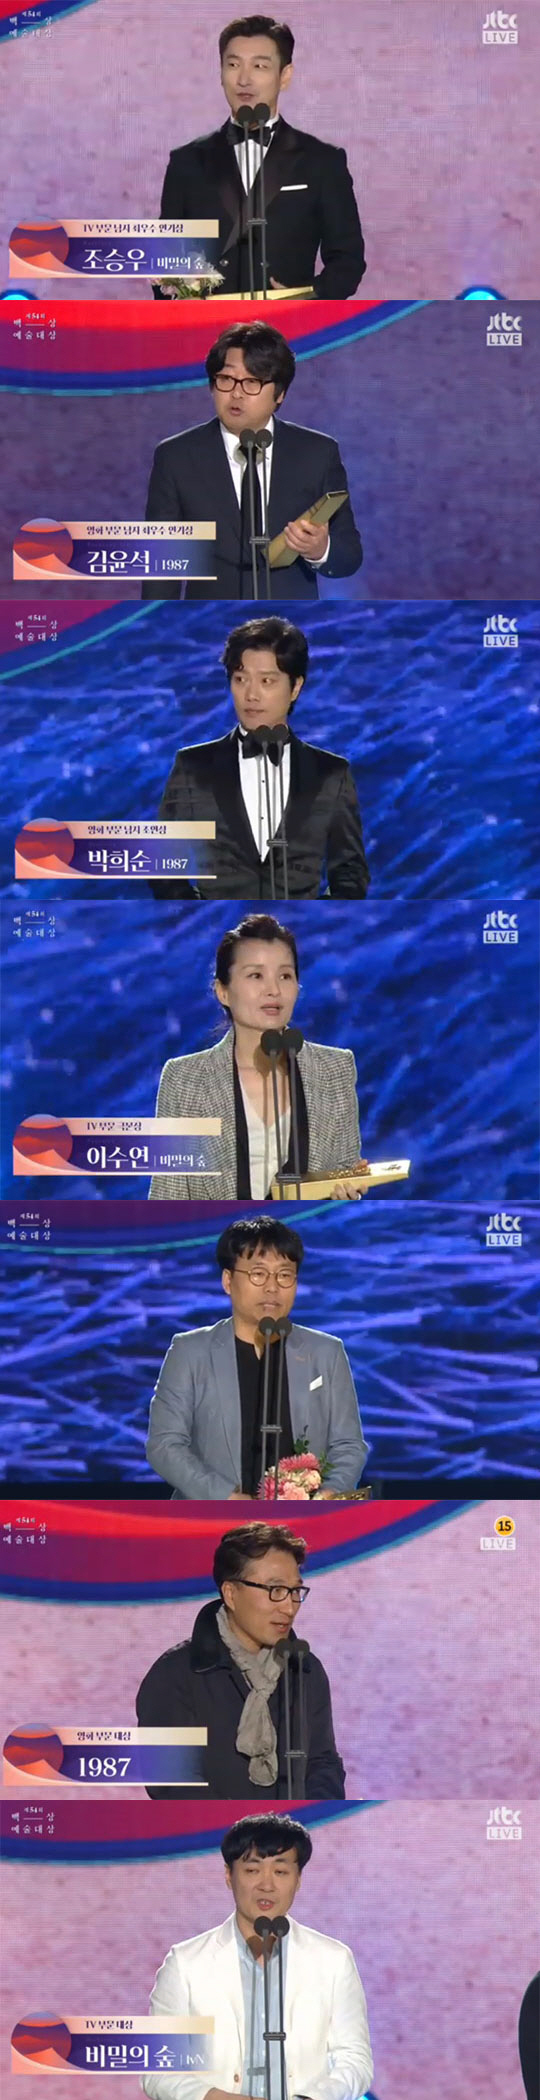 The honor of the 54th Baeksang Arts Awards on March 3 was won by TVN drama Stranger and movie 1987 in TV division.Stranger is a genre that deals with the back of the prosecution, which has been dirty with sponsors. 1987 was based on the June 1987 uprising, which won democracy against military dictatorship.Both works have a common point that they are reconsiderated Korean modern history, which was hot.In addition to the Grand Prize, Stranger won the Grand Prize by Cho Seung-woo, the best male, and Lee Soo-yeon, the author.1987 won the best male, Kim Kyung-chan won the scenario, and Park Hee-soon won the male supporting actor.In both categories, it is noteworthy that the works that won the Grand Prize, the scenario, and the male best acting award are the most popular candidates.She with dignity (the best director), Misty (the best female) and Mother (the best female), who were mentioned as counter-horses of Stranger, each took only 1-2 categories.The film category also has 14 million viewers, and With God is in two categories (director and visual effects).Namhansanseong, which competed with 1987 in various film awards, won one category (picture award); the topical film Crime City also won only one category (new director award).Although it is a masterpiece filled with high perfection, novel story progress, and high-quality performances, the weight of modern history in 1987 or Stranger seems to fit more appropriately with the flow of the times. did.1987 Kim Kyung-chan writes, It seems to receive this award thanks to Park Jong-cheol and Lee Han-yeol.I also thank Mrs. Bae Eun-shim. Kim Yoon-seok and Park Hee-soon also decided to appear for those who sacrificed for democracy.I think its a group award for all the actors in the movie. Cho Seung-woo said, Help Stranger do the season.I would like to have a season 5 personally. The dream artist who received the male newcomer award said, I hope a good world will come.I will be a good actor, said Choi Hee-seo, who left an impressive impression, Park Hee-seo debuted in 2009 and did not show for nine years.Those who try to dream, never give up. In addition, Misty Kim Nam-ju said in his testimony to the best actress award, I was lucky to meet Ko Hye-ran.I will continue to approach fair and transparent acting in the future. 